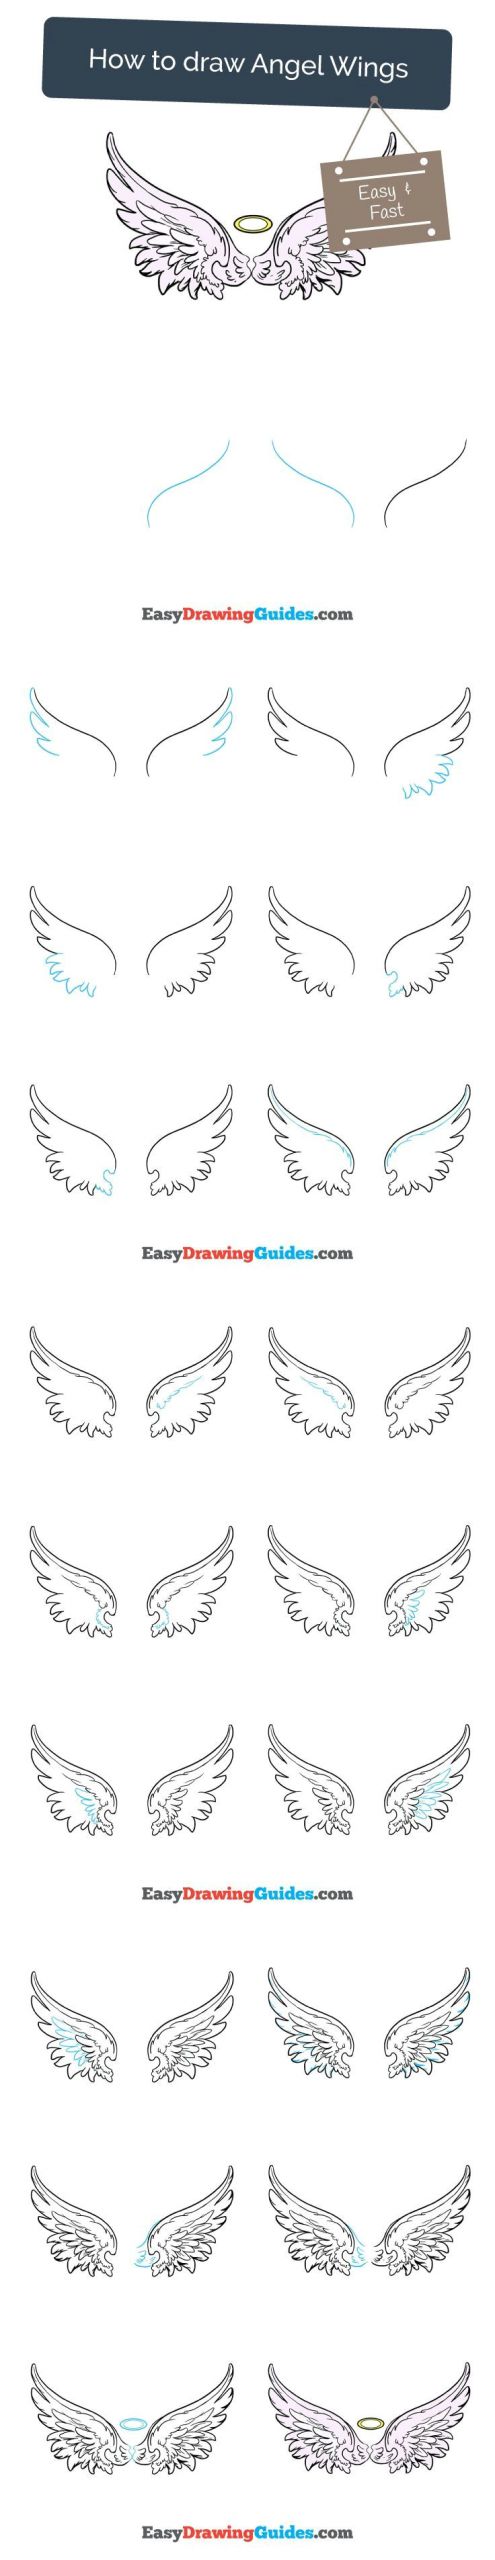 Easy to Draw Feather How to Draw Angel Wings Wings Drawing Angel Drawing